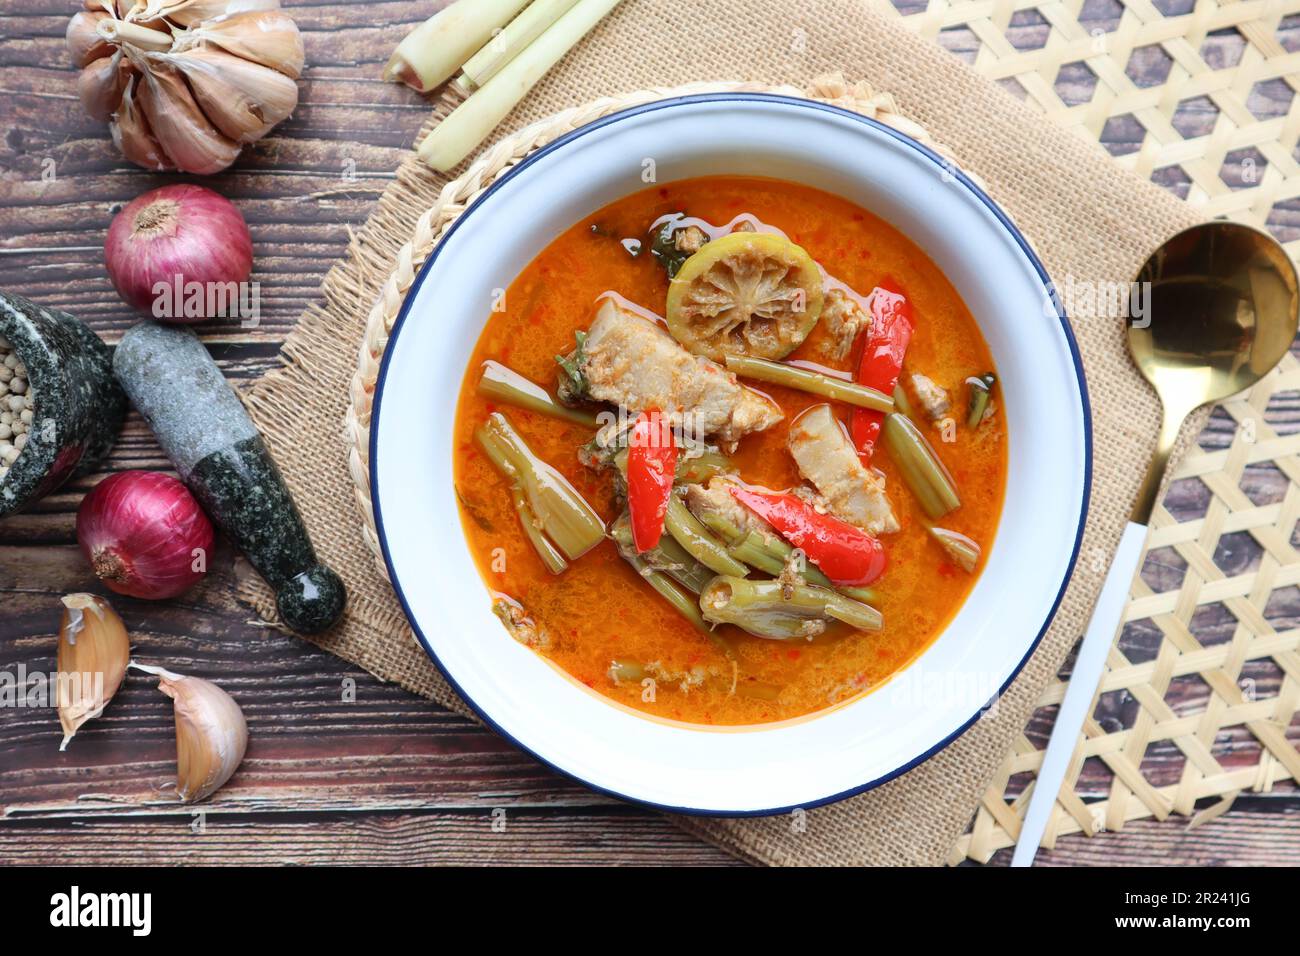 Red curry with morning glory and pork belly - Authentic Thai food called Kang Tay po or Geang Tay po at close up view Stock Photo